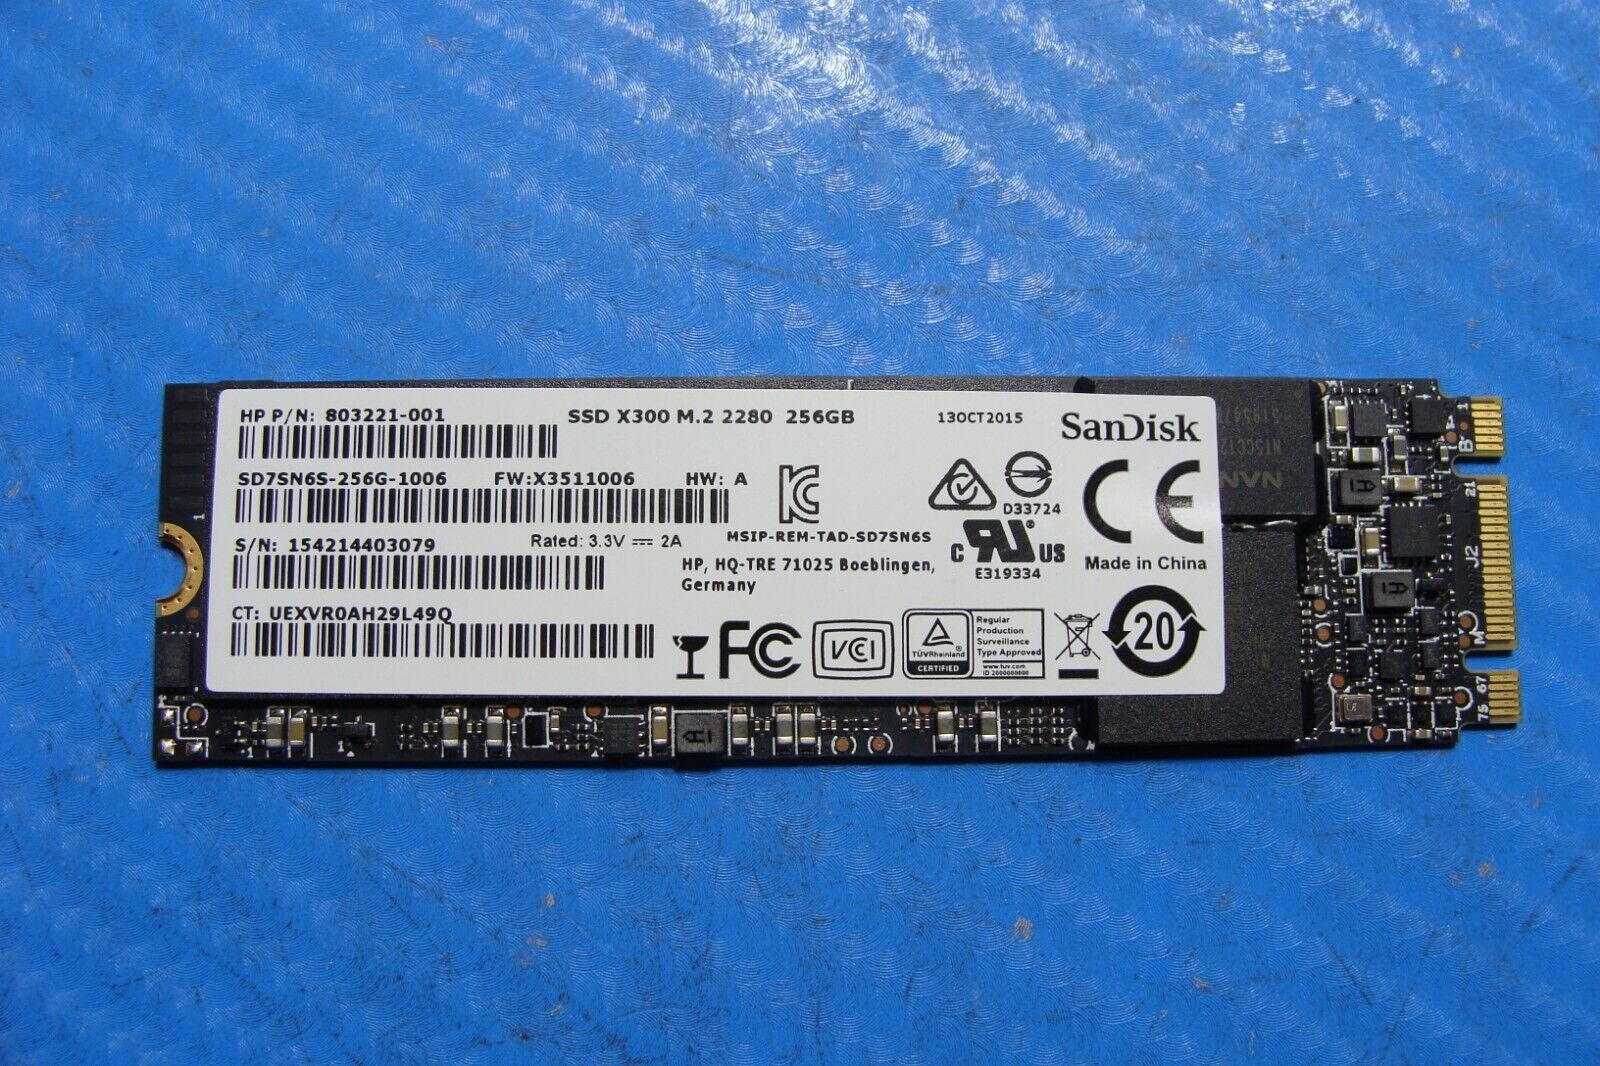 HP SanDisk X300 256Gb M.2 SSD Solid State Drive SD7SN6S-256G-1006